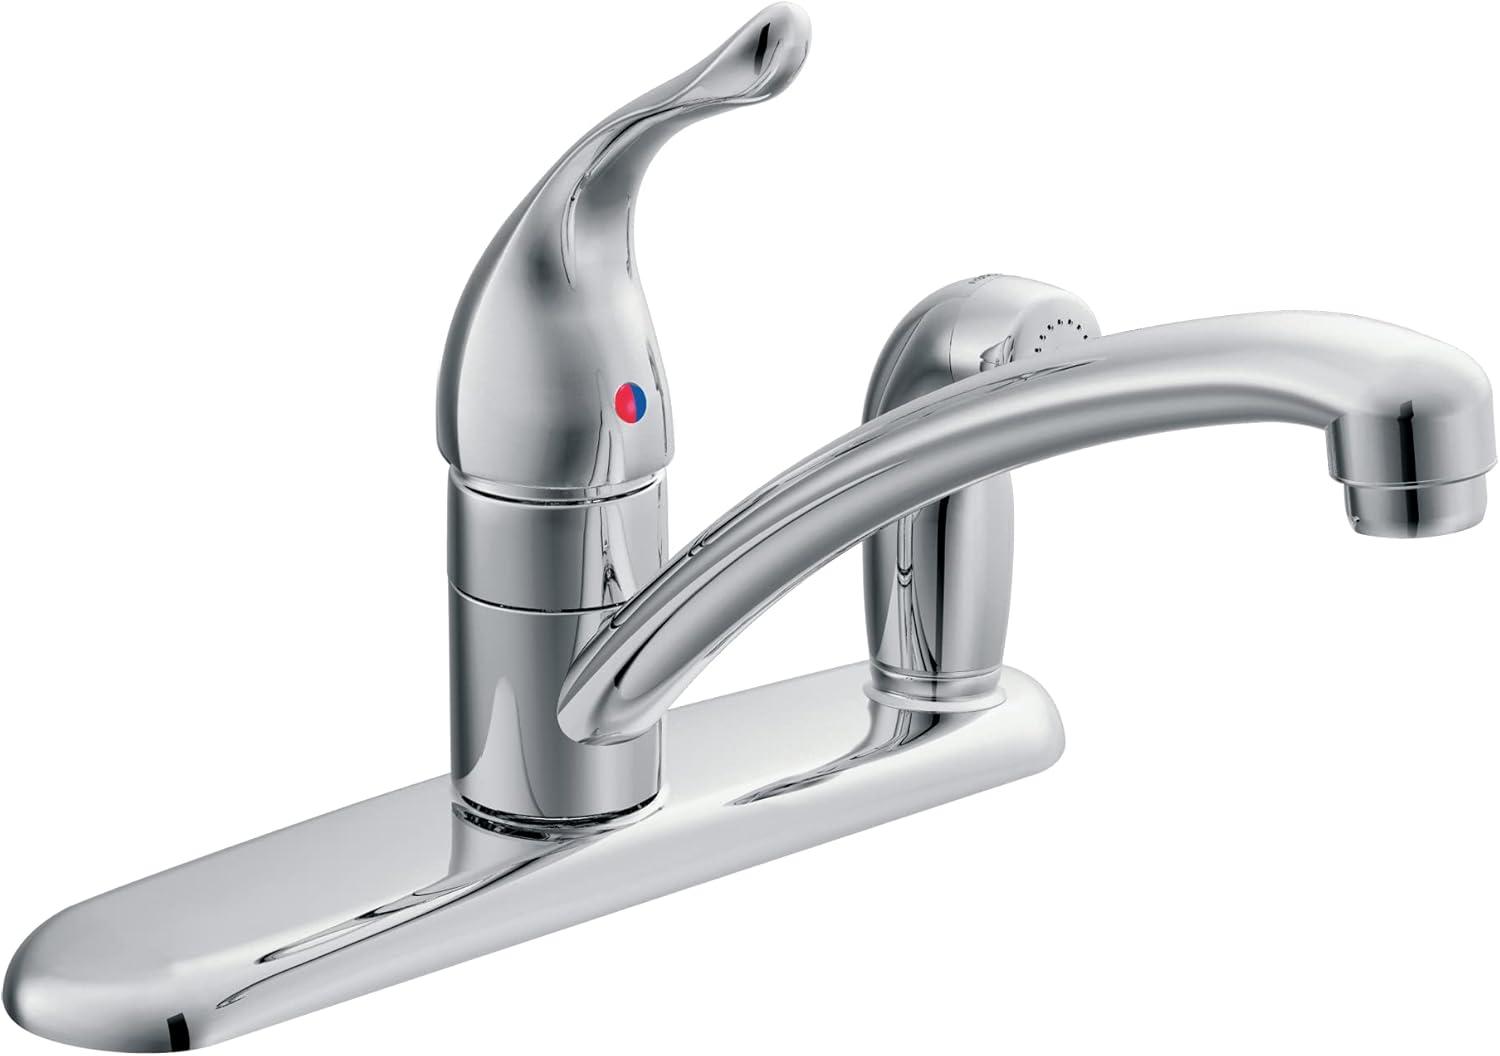 Classic Chrome Deck-Mounted Kitchen Faucet with Pull-Out Spray